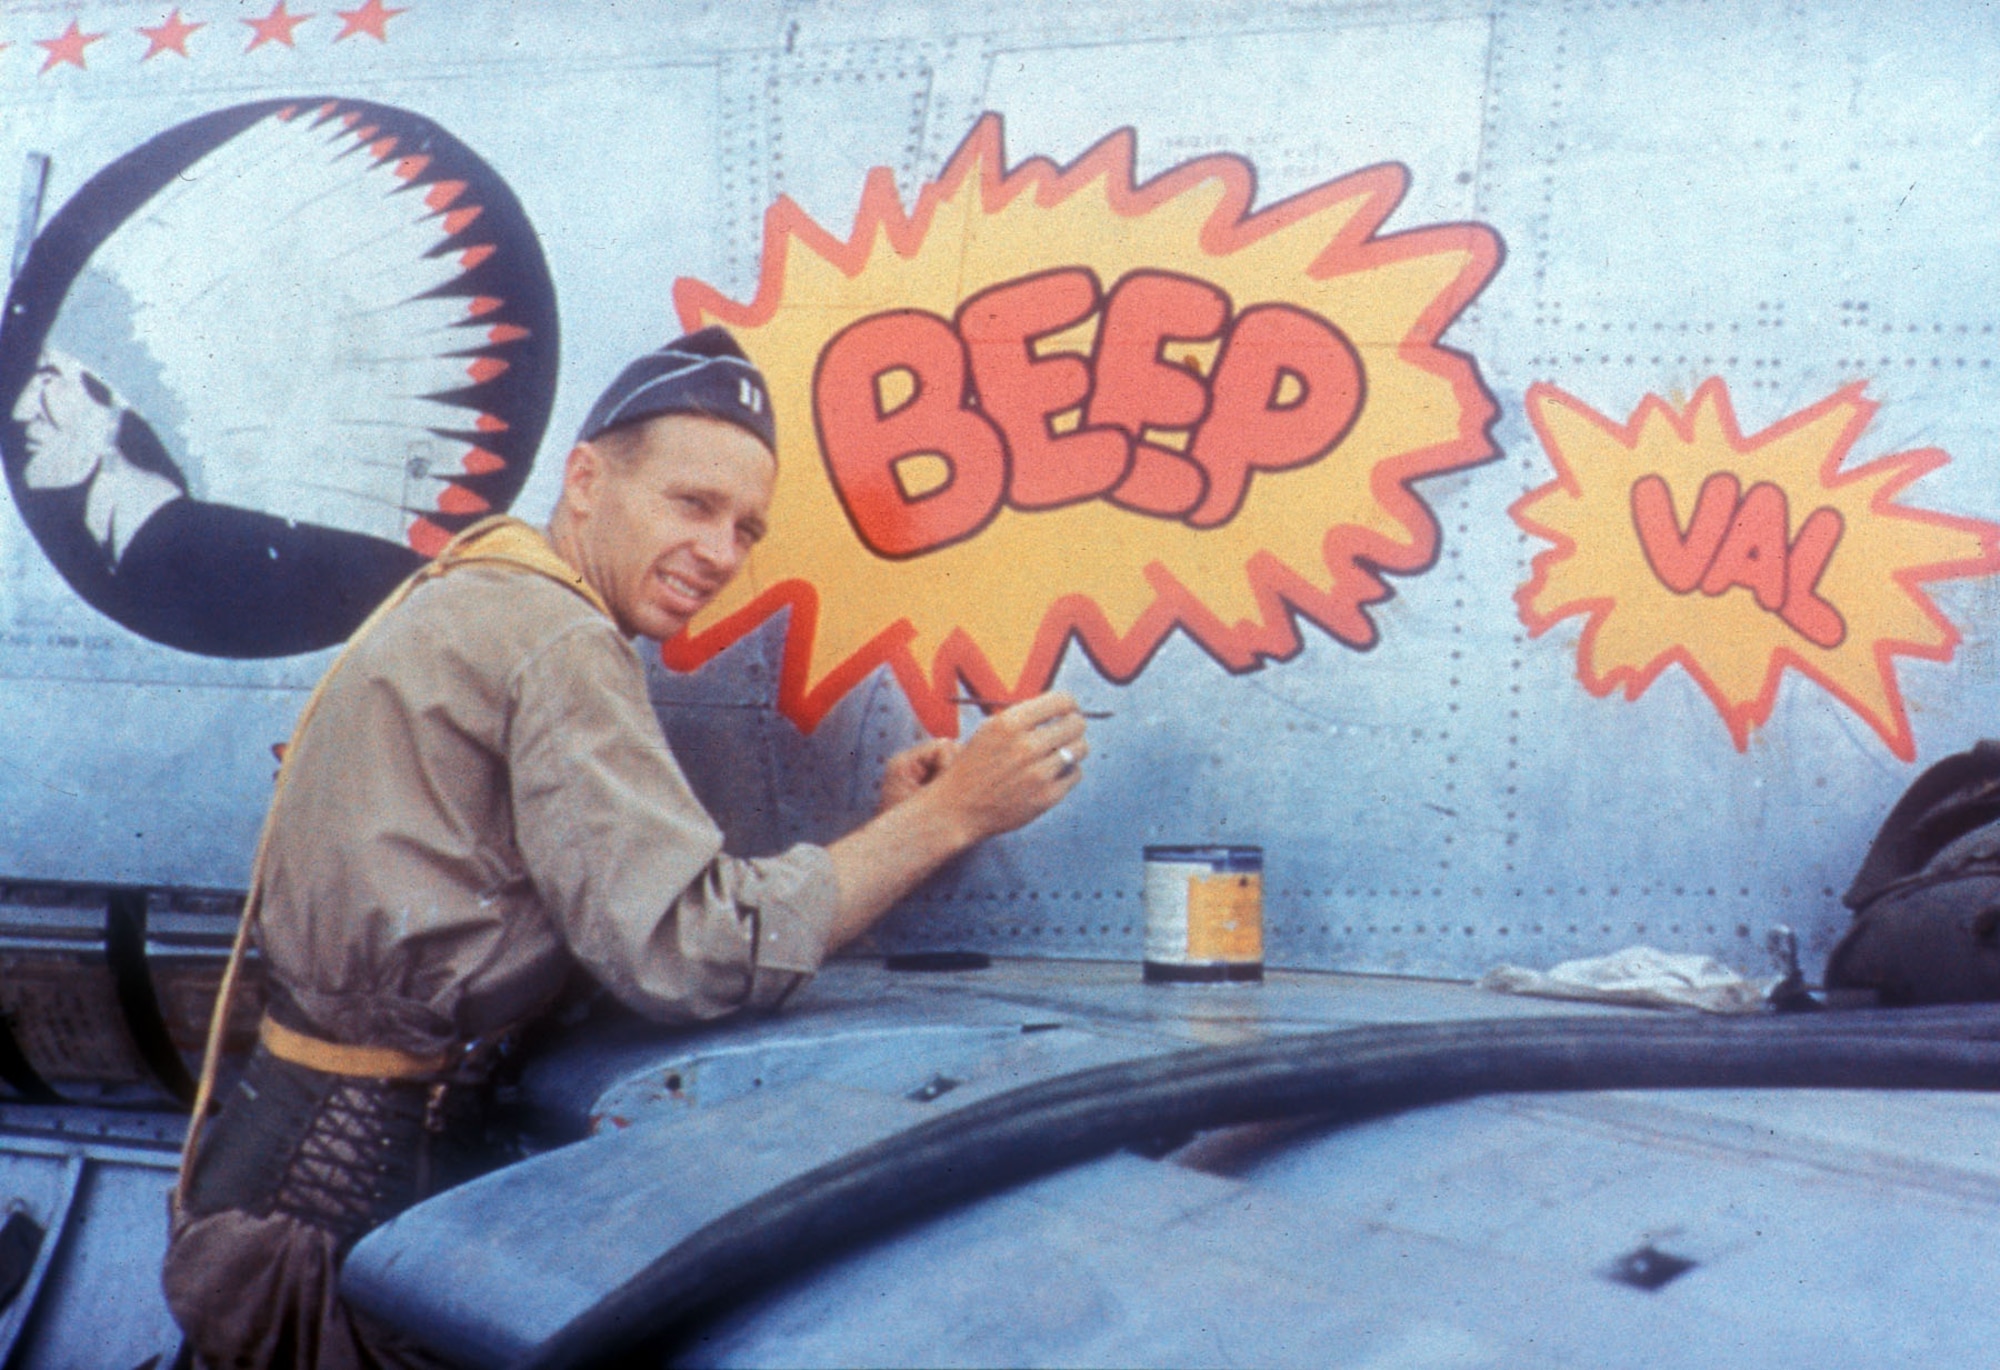 Fighter aircraft often carried decorative “nose art” in Korea. Pictured here is Capt. Karl Dittmer Jr., an F-86 pilot with three MiG kills, at work. Dittmer painted nose art on many of the 335th Fighter Interceptor Squadron’s Sabres at Kimpo. (U.S. Air Force photo)